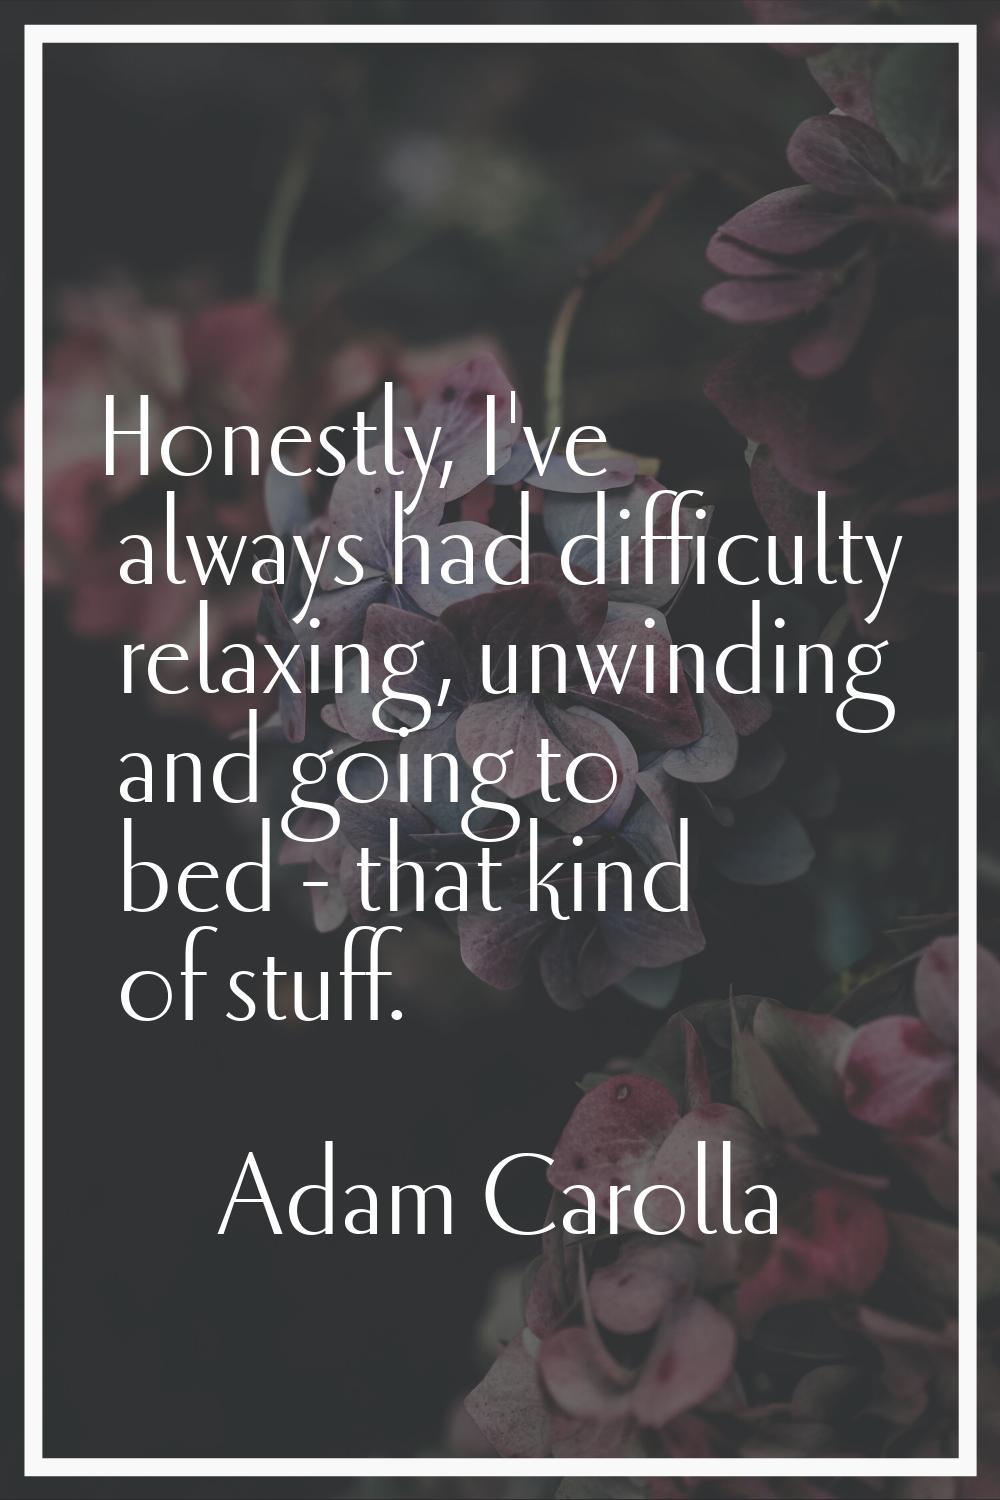 Honestly, I've always had difficulty relaxing, unwinding and going to bed - that kind of stuff.